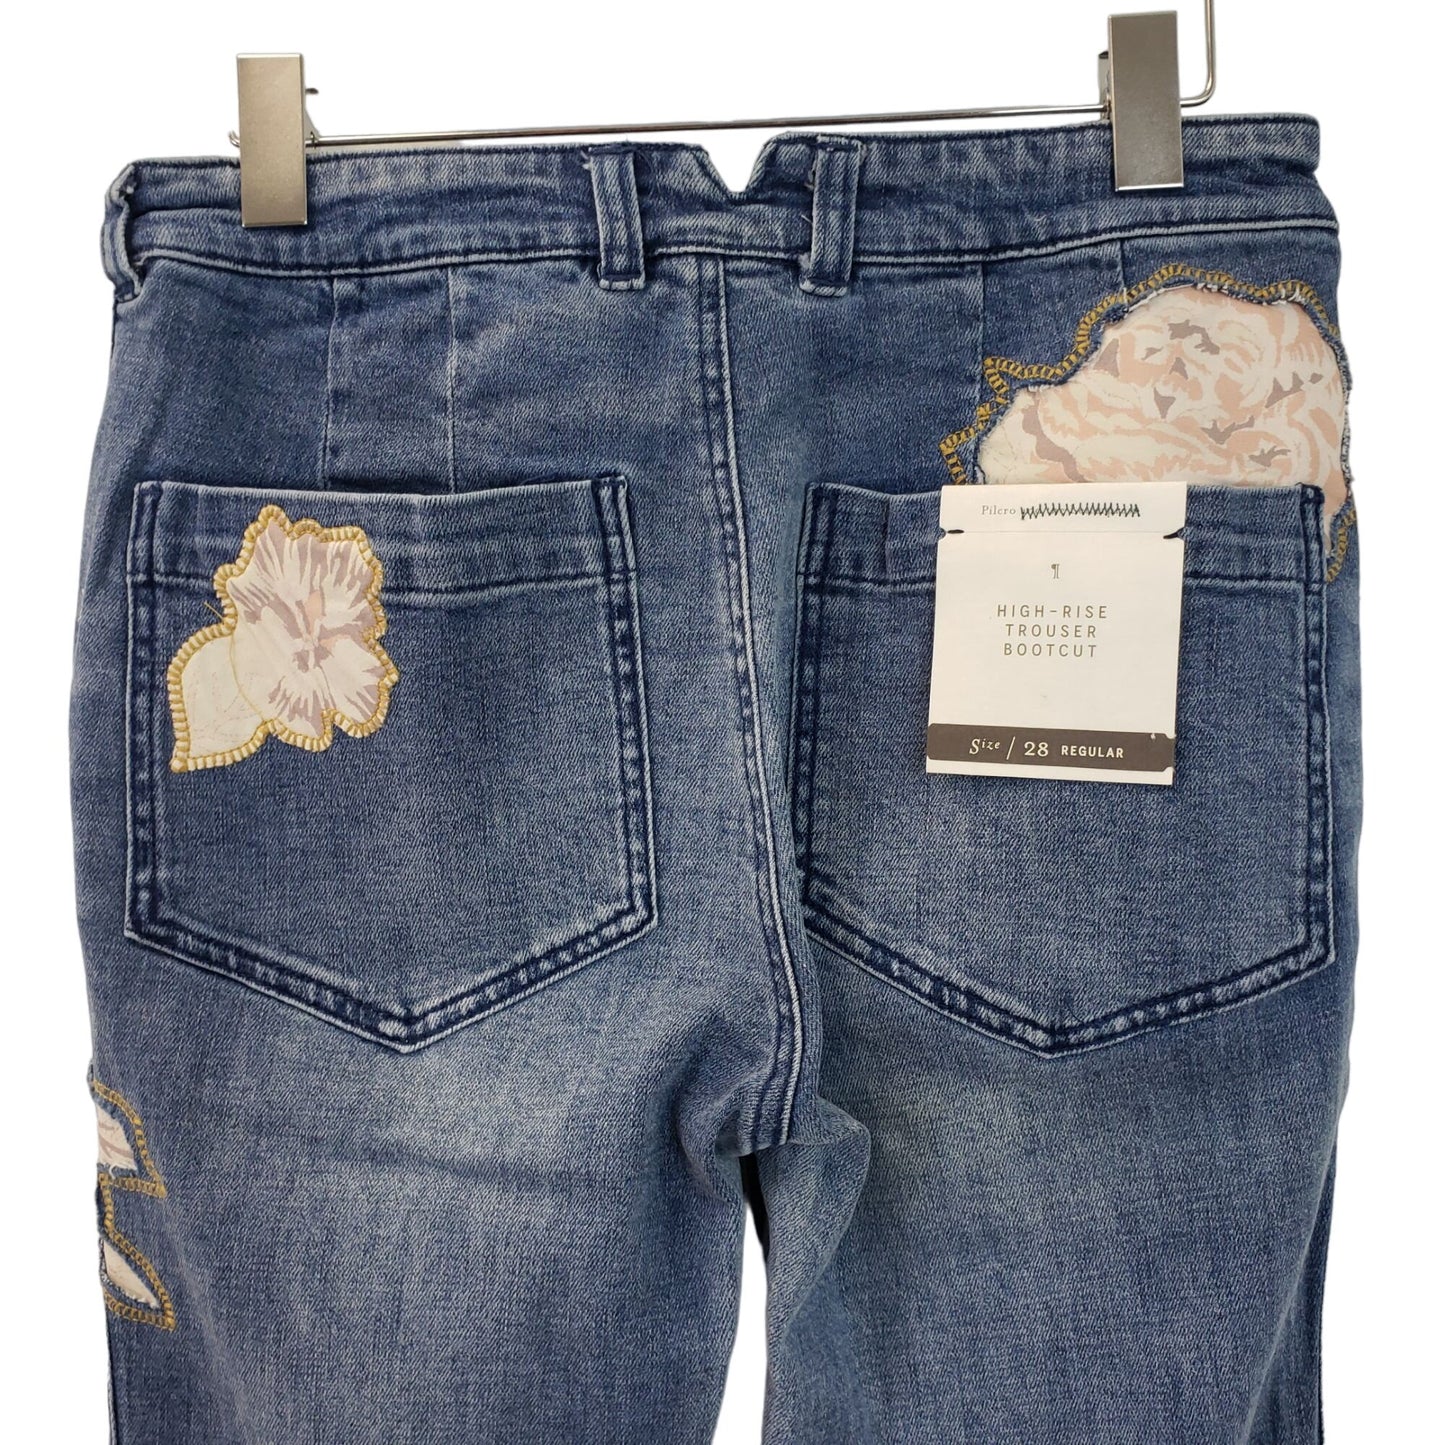 NWT Anthropologie Pilcro & The Letterpress High-Rise Trouser Bootcut Jeans Size 28